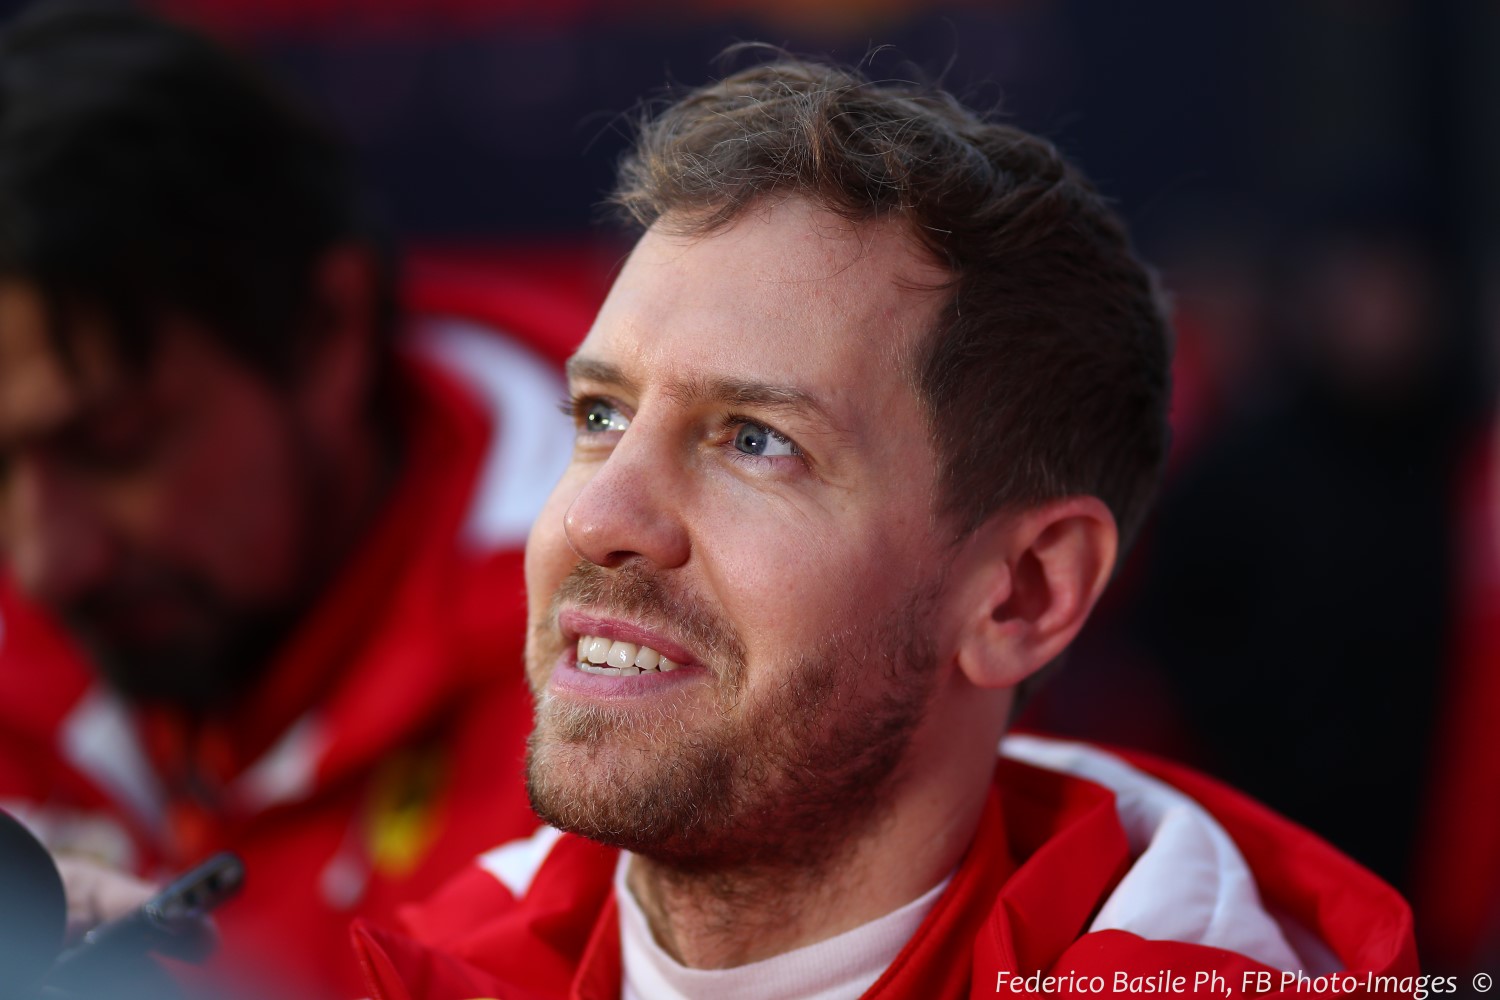 Vettel should have a few good years left